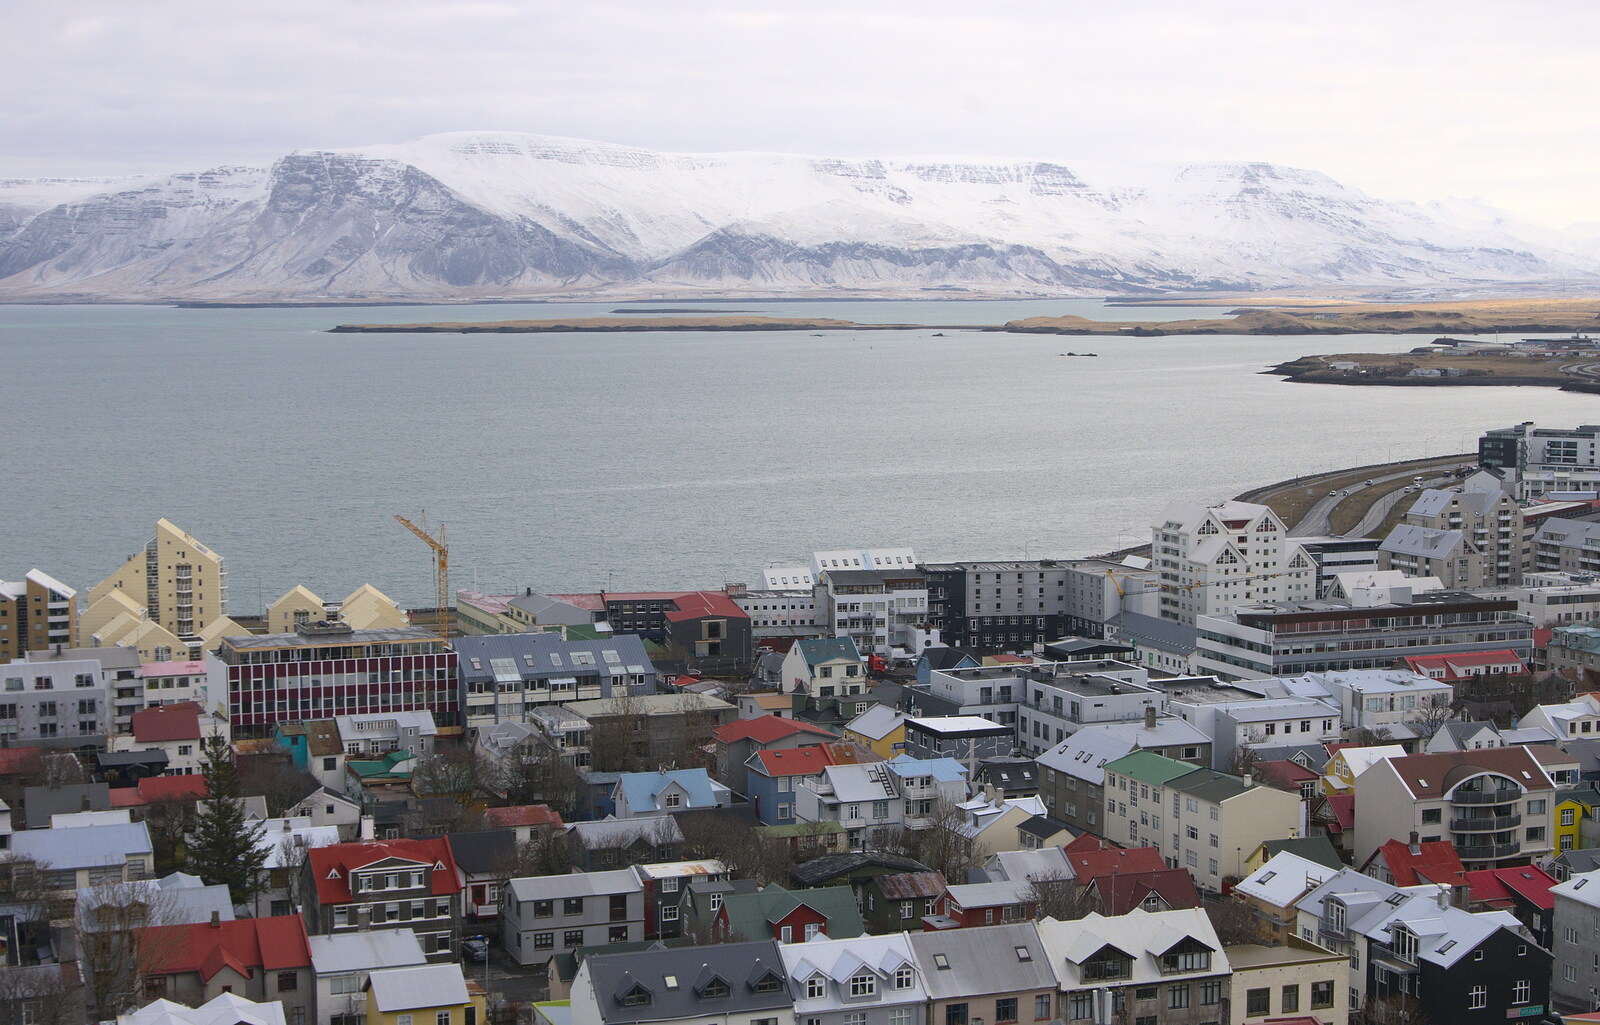 A view over the bay from the cathedral tower from Hallgrímskirkja Cathedral and Whale Watching, Reykjavik - 21st April 2017